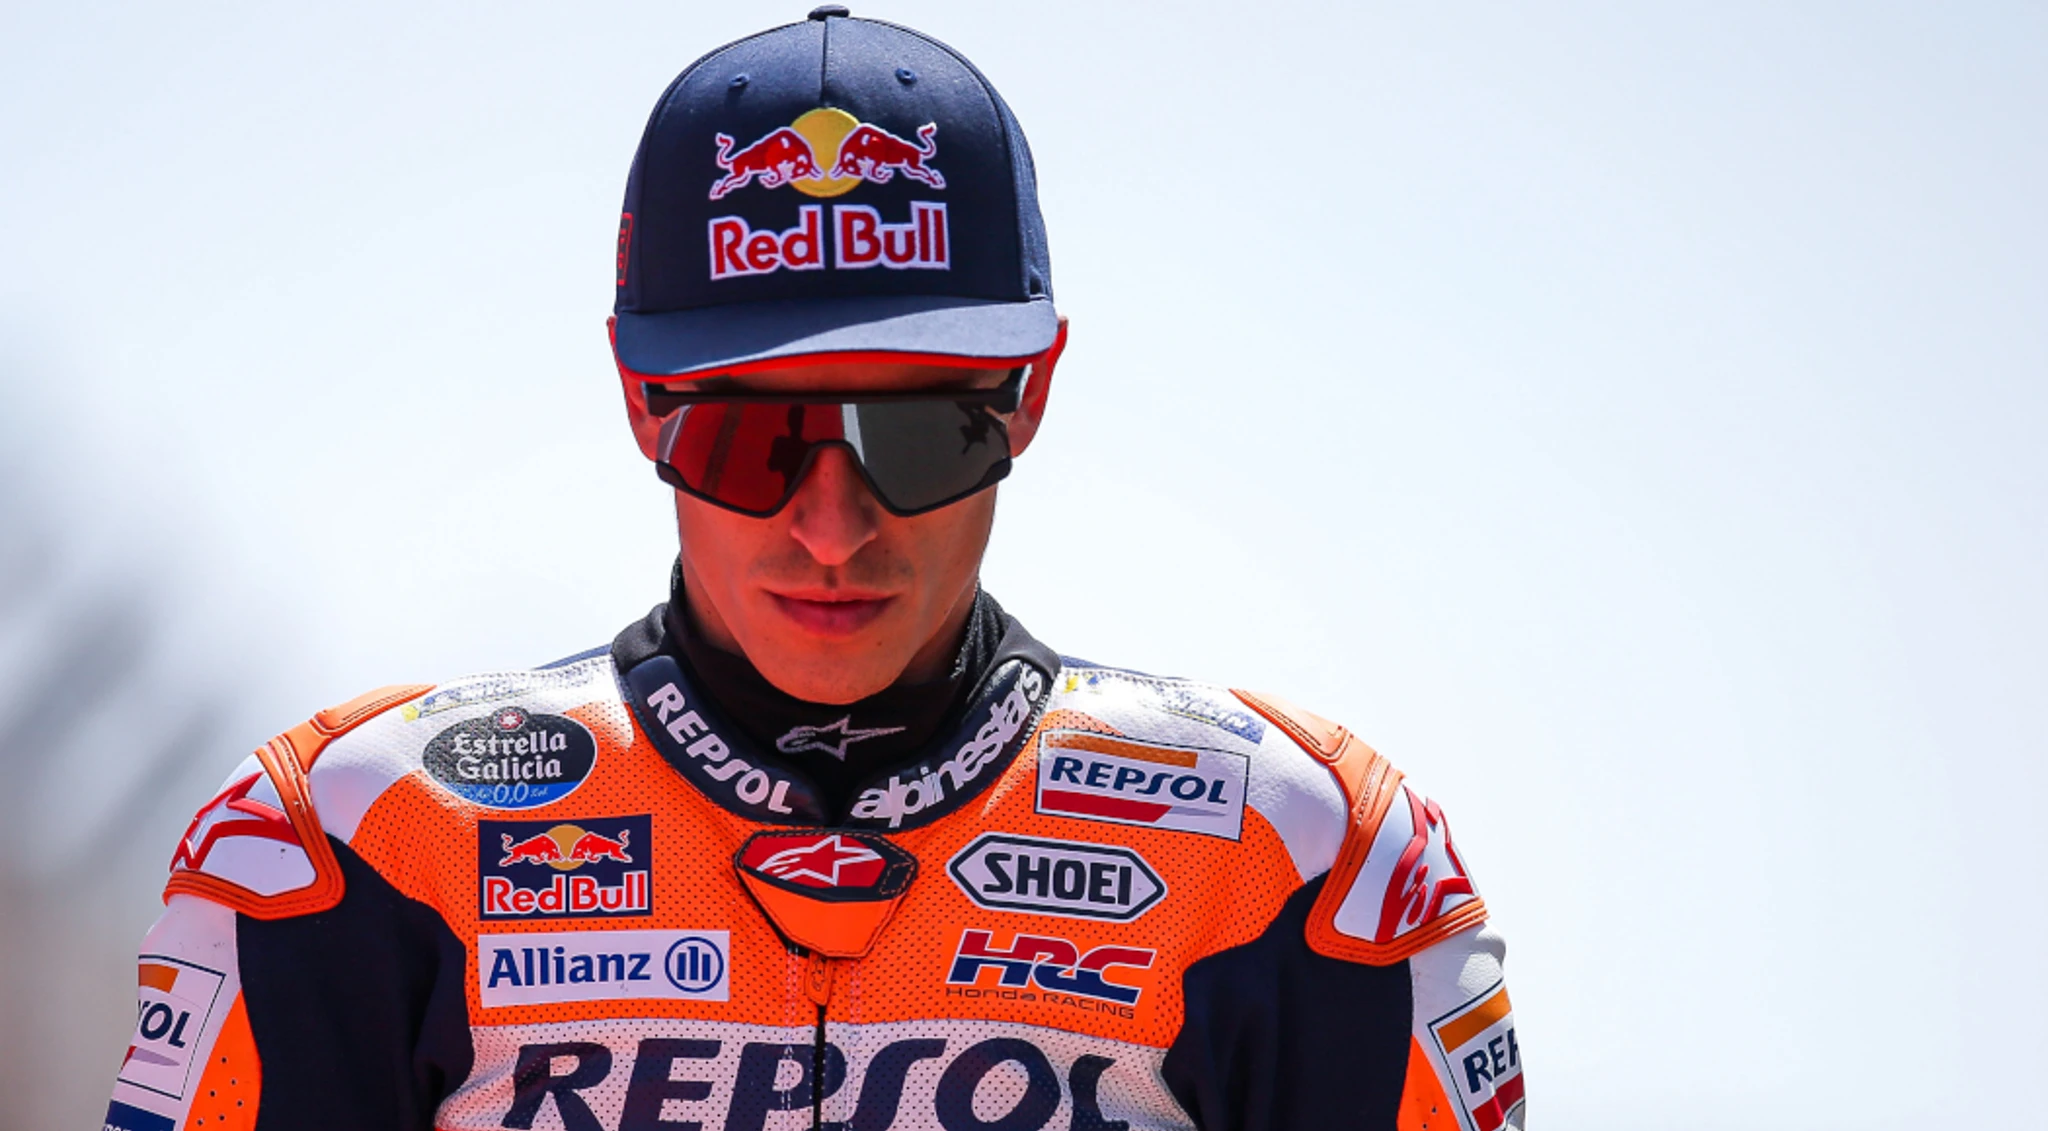 Marc Marquez to miss Americas GP due to injury